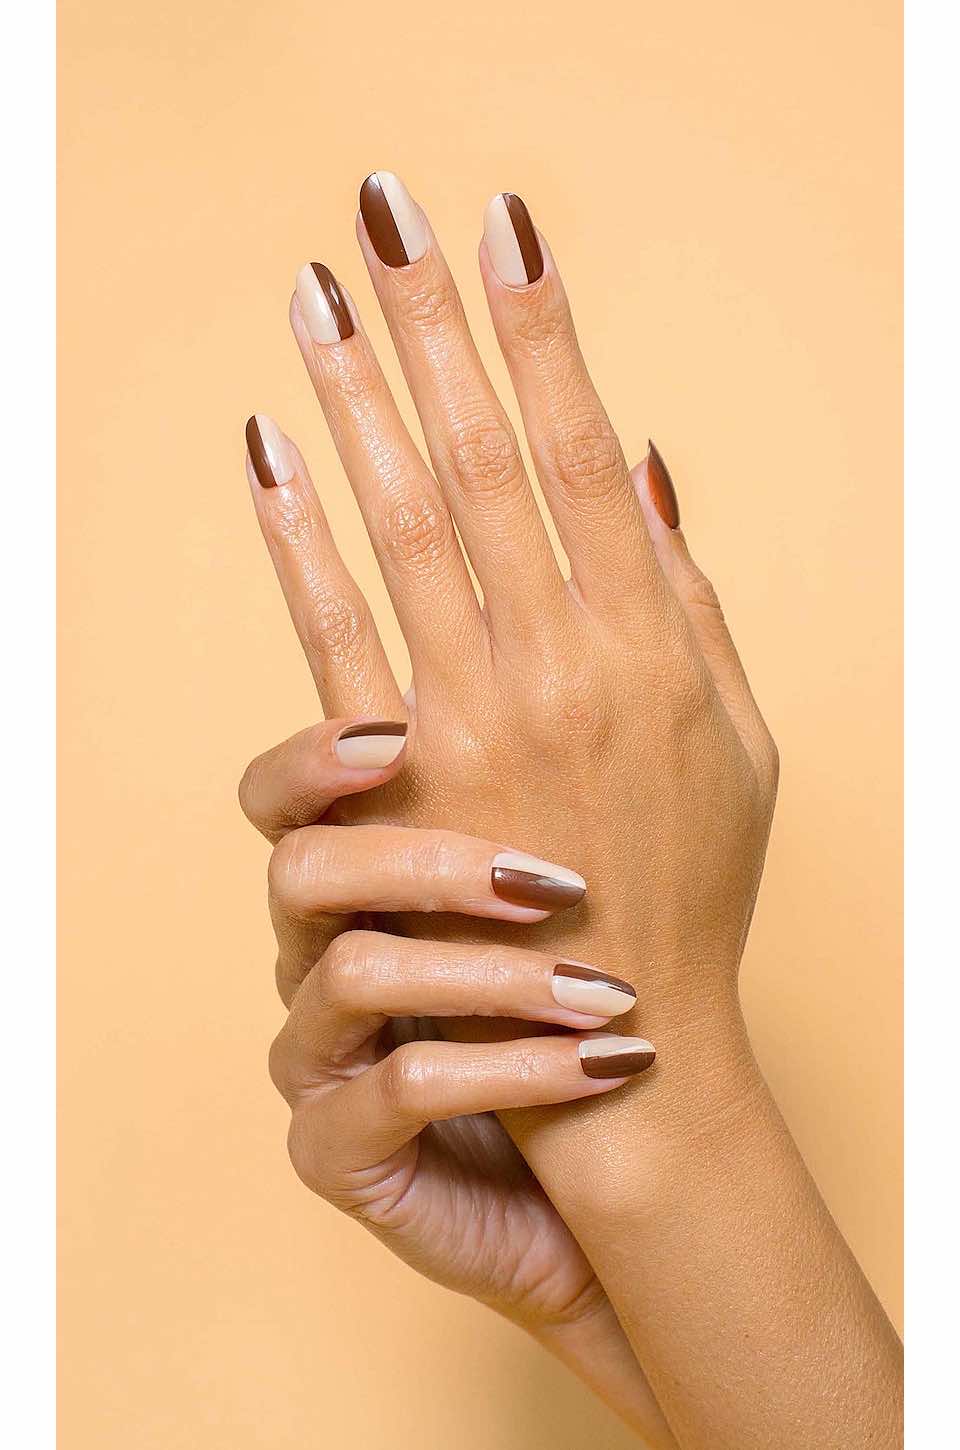 50+ Fall Nail Ideas For Your Next Manicure